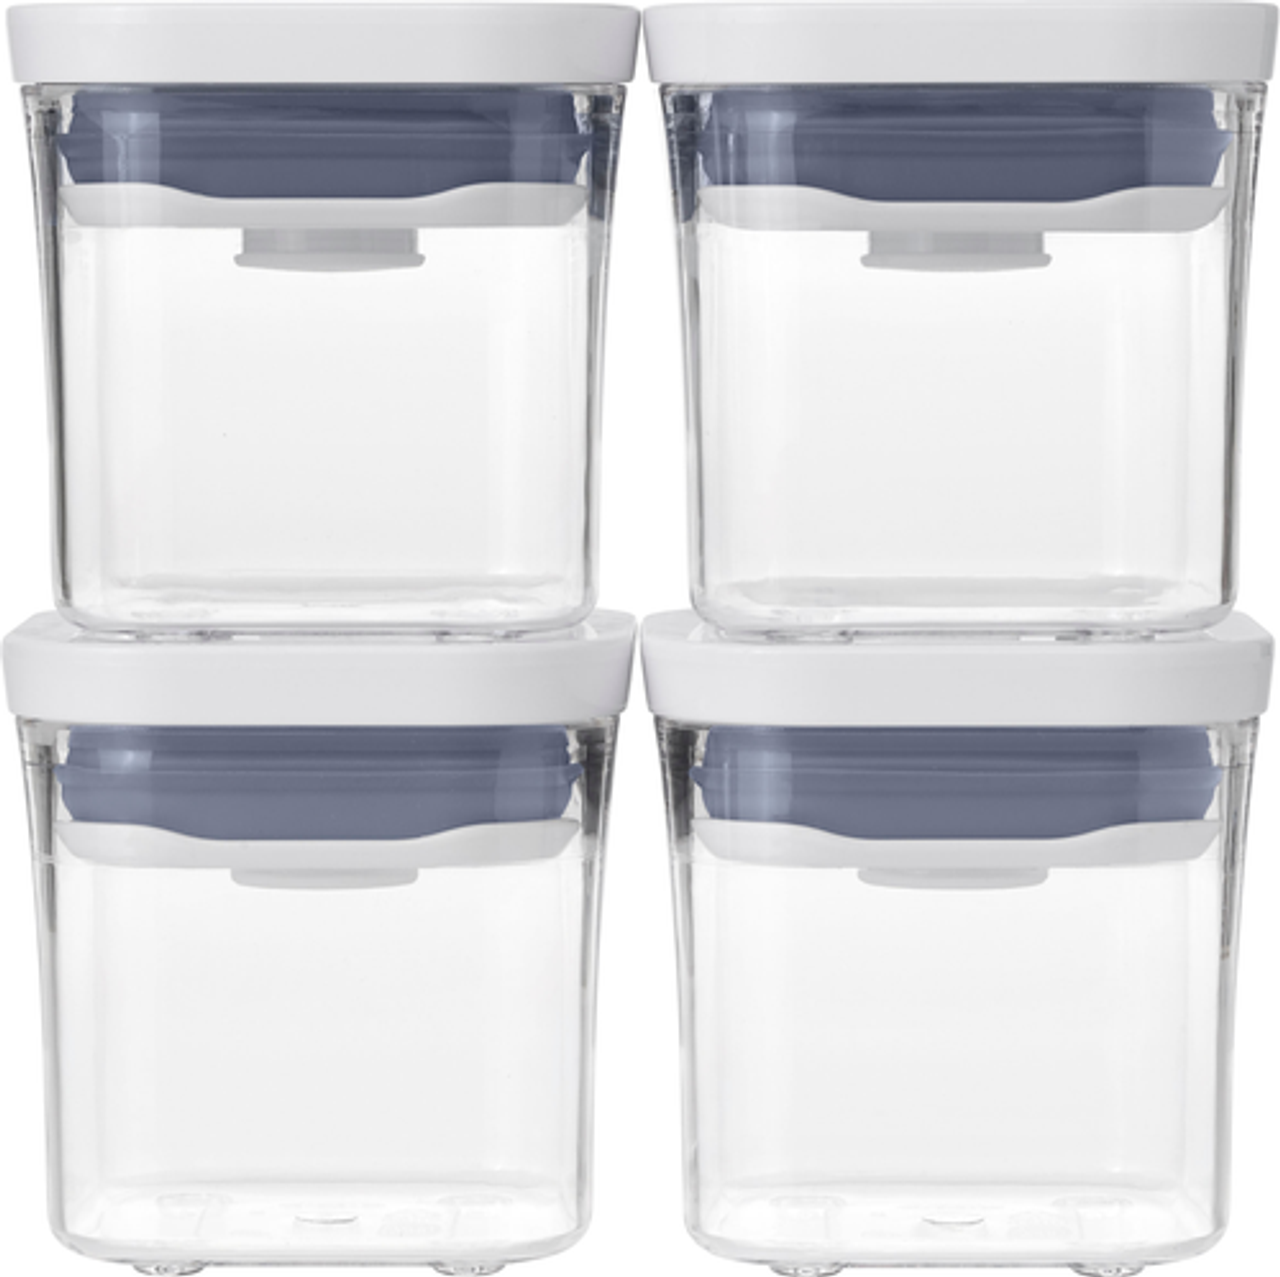 OXO - GG 4-PC Mini Pop Container Set - Clear